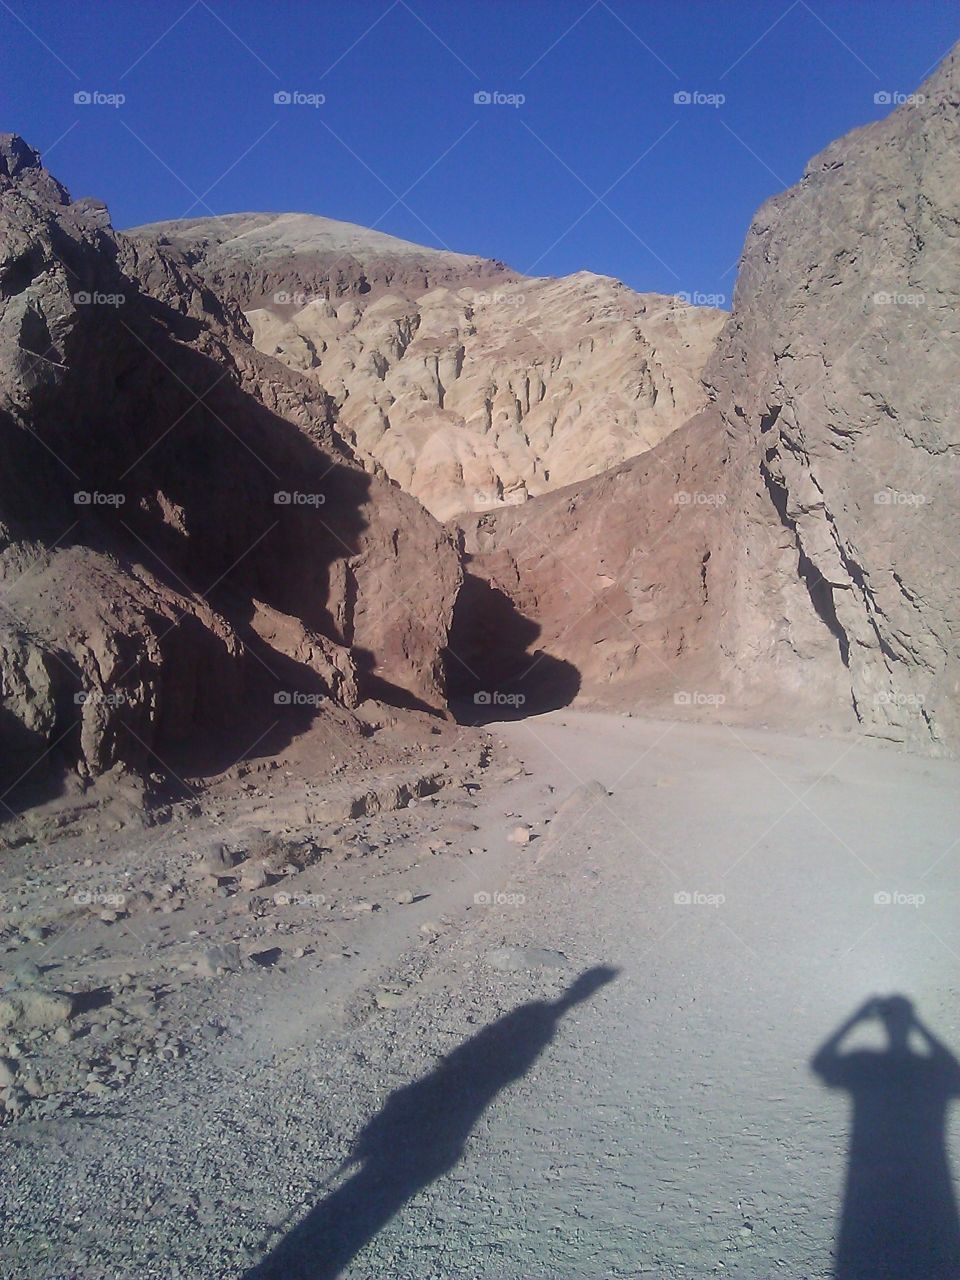 Human Shadows in Canyon. During the sunset, two human shadows inside a Death Valley canyon.